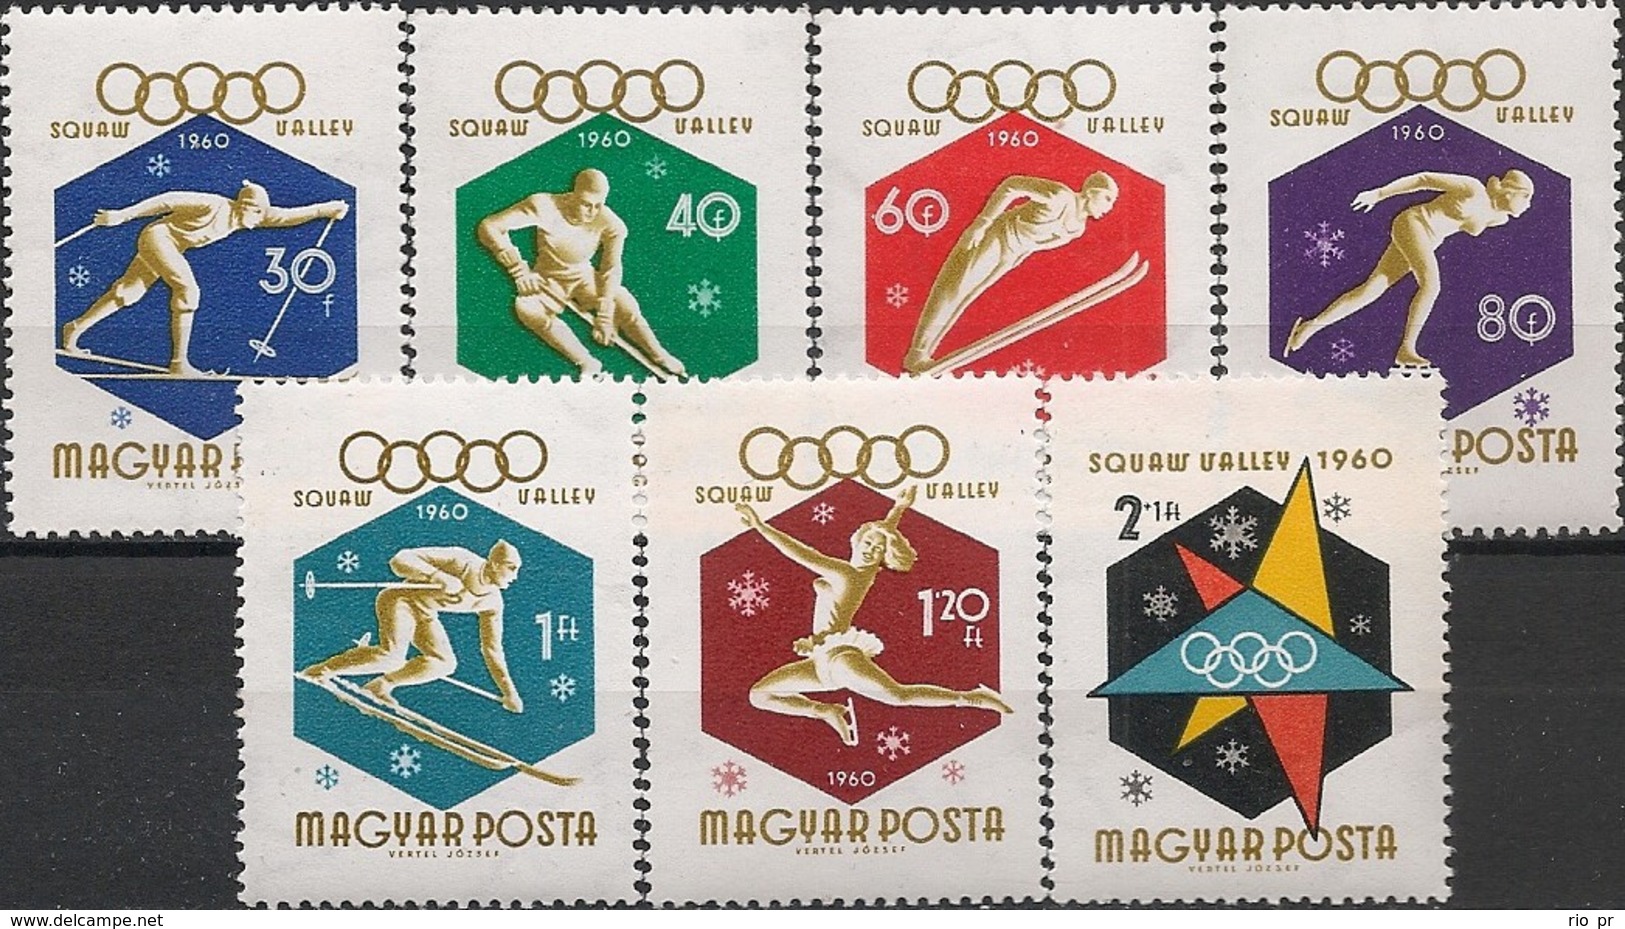 HUNGARY - COMPLETE SET SQUAW VALLEY'60 WINTER OLYMPIC GAMES 1960 - MNH - Inverno1960: Squaw Valley